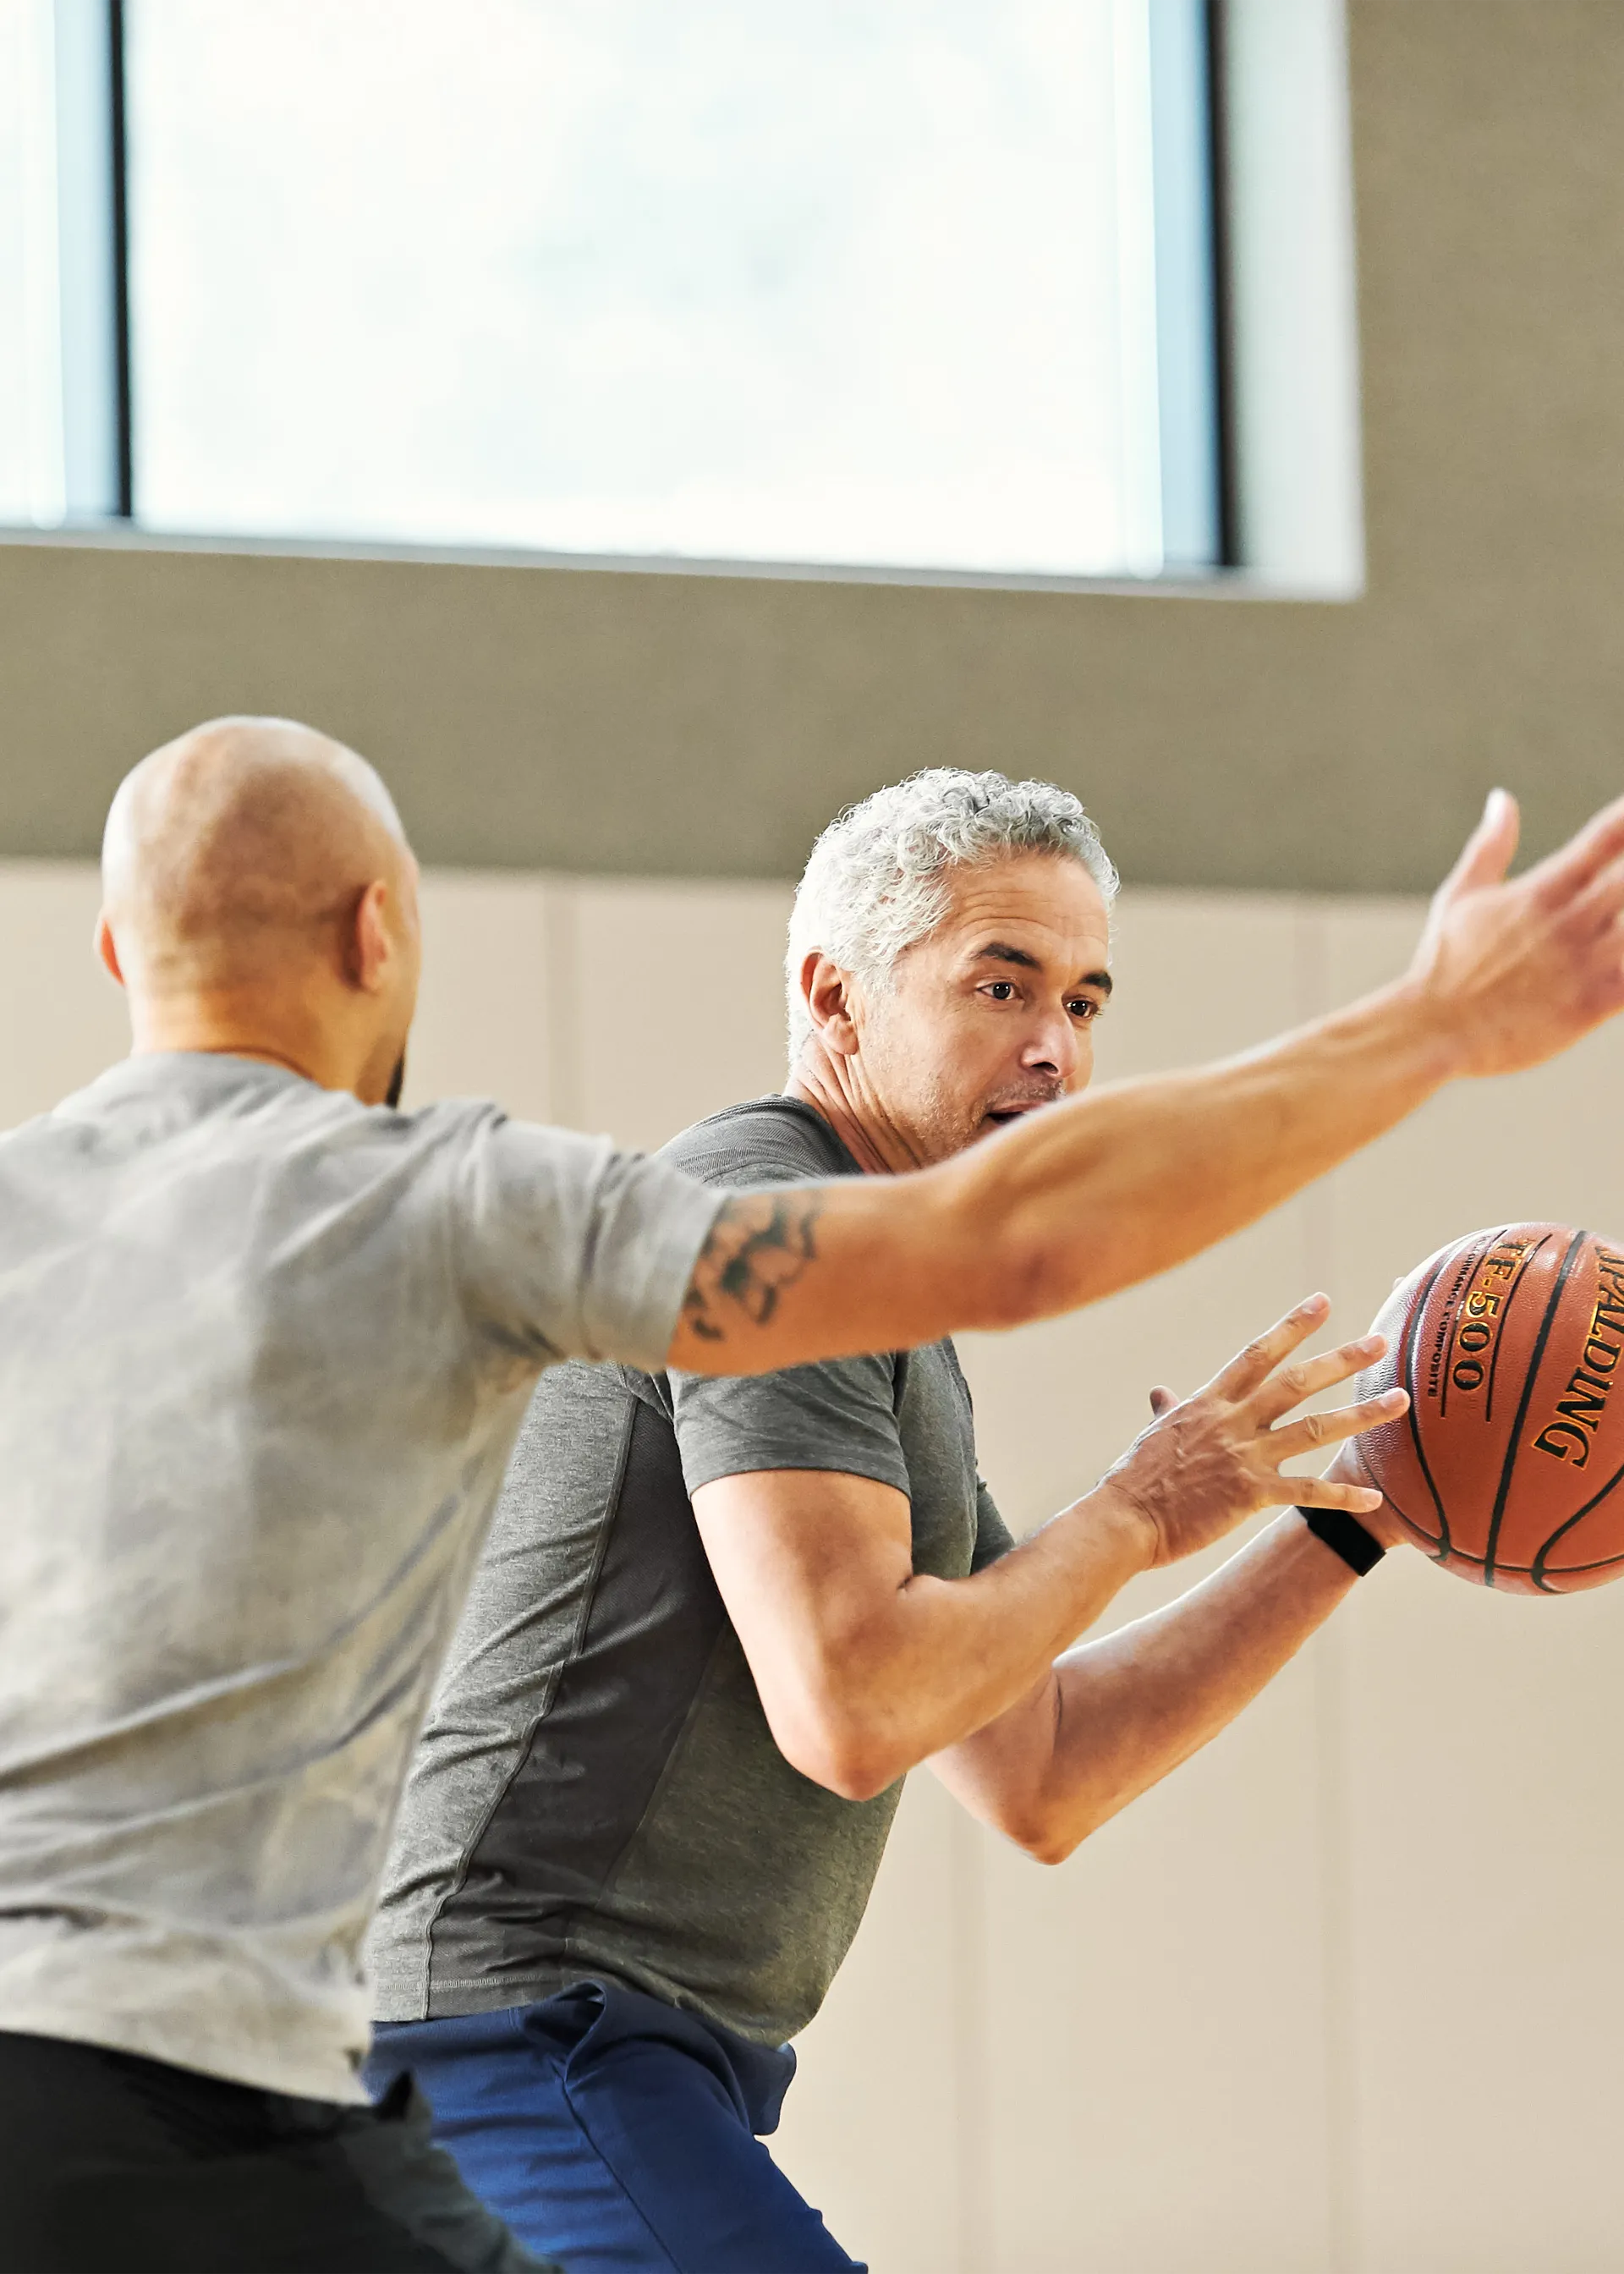 Two men playing basketball on an indoor court.